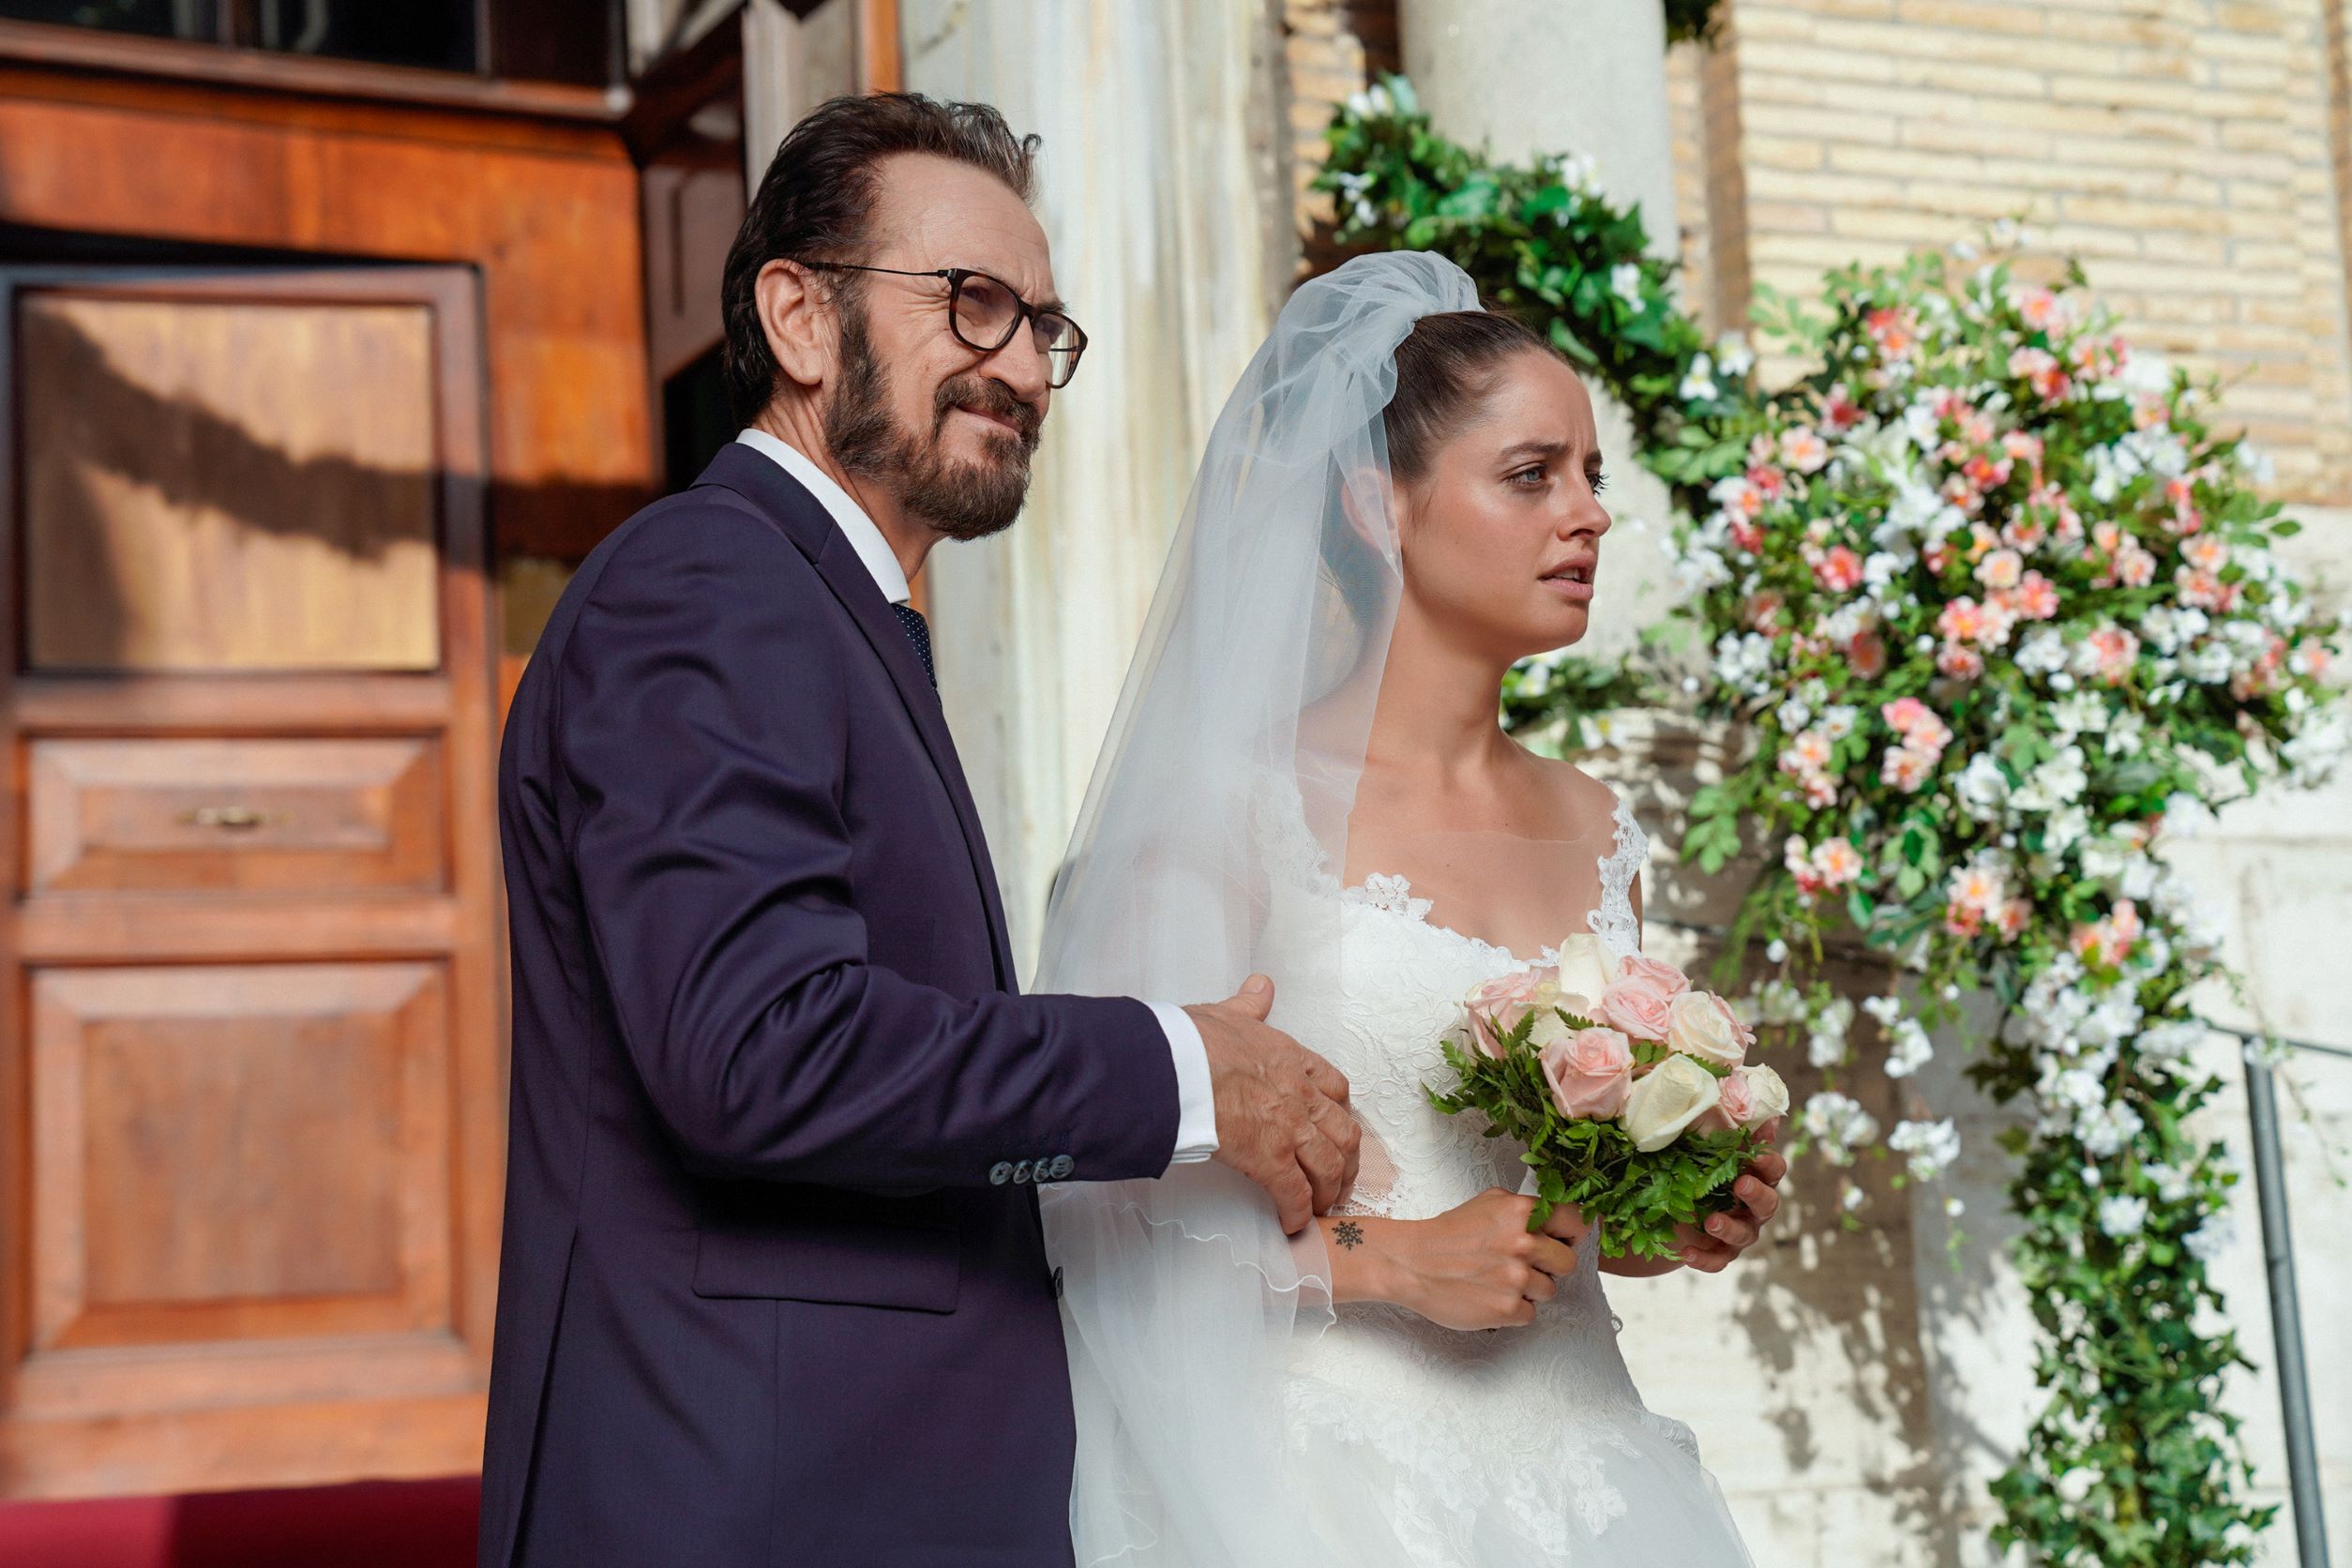 A scene from the Italian film Three Perfect Daughters, featuring a bride and her father.